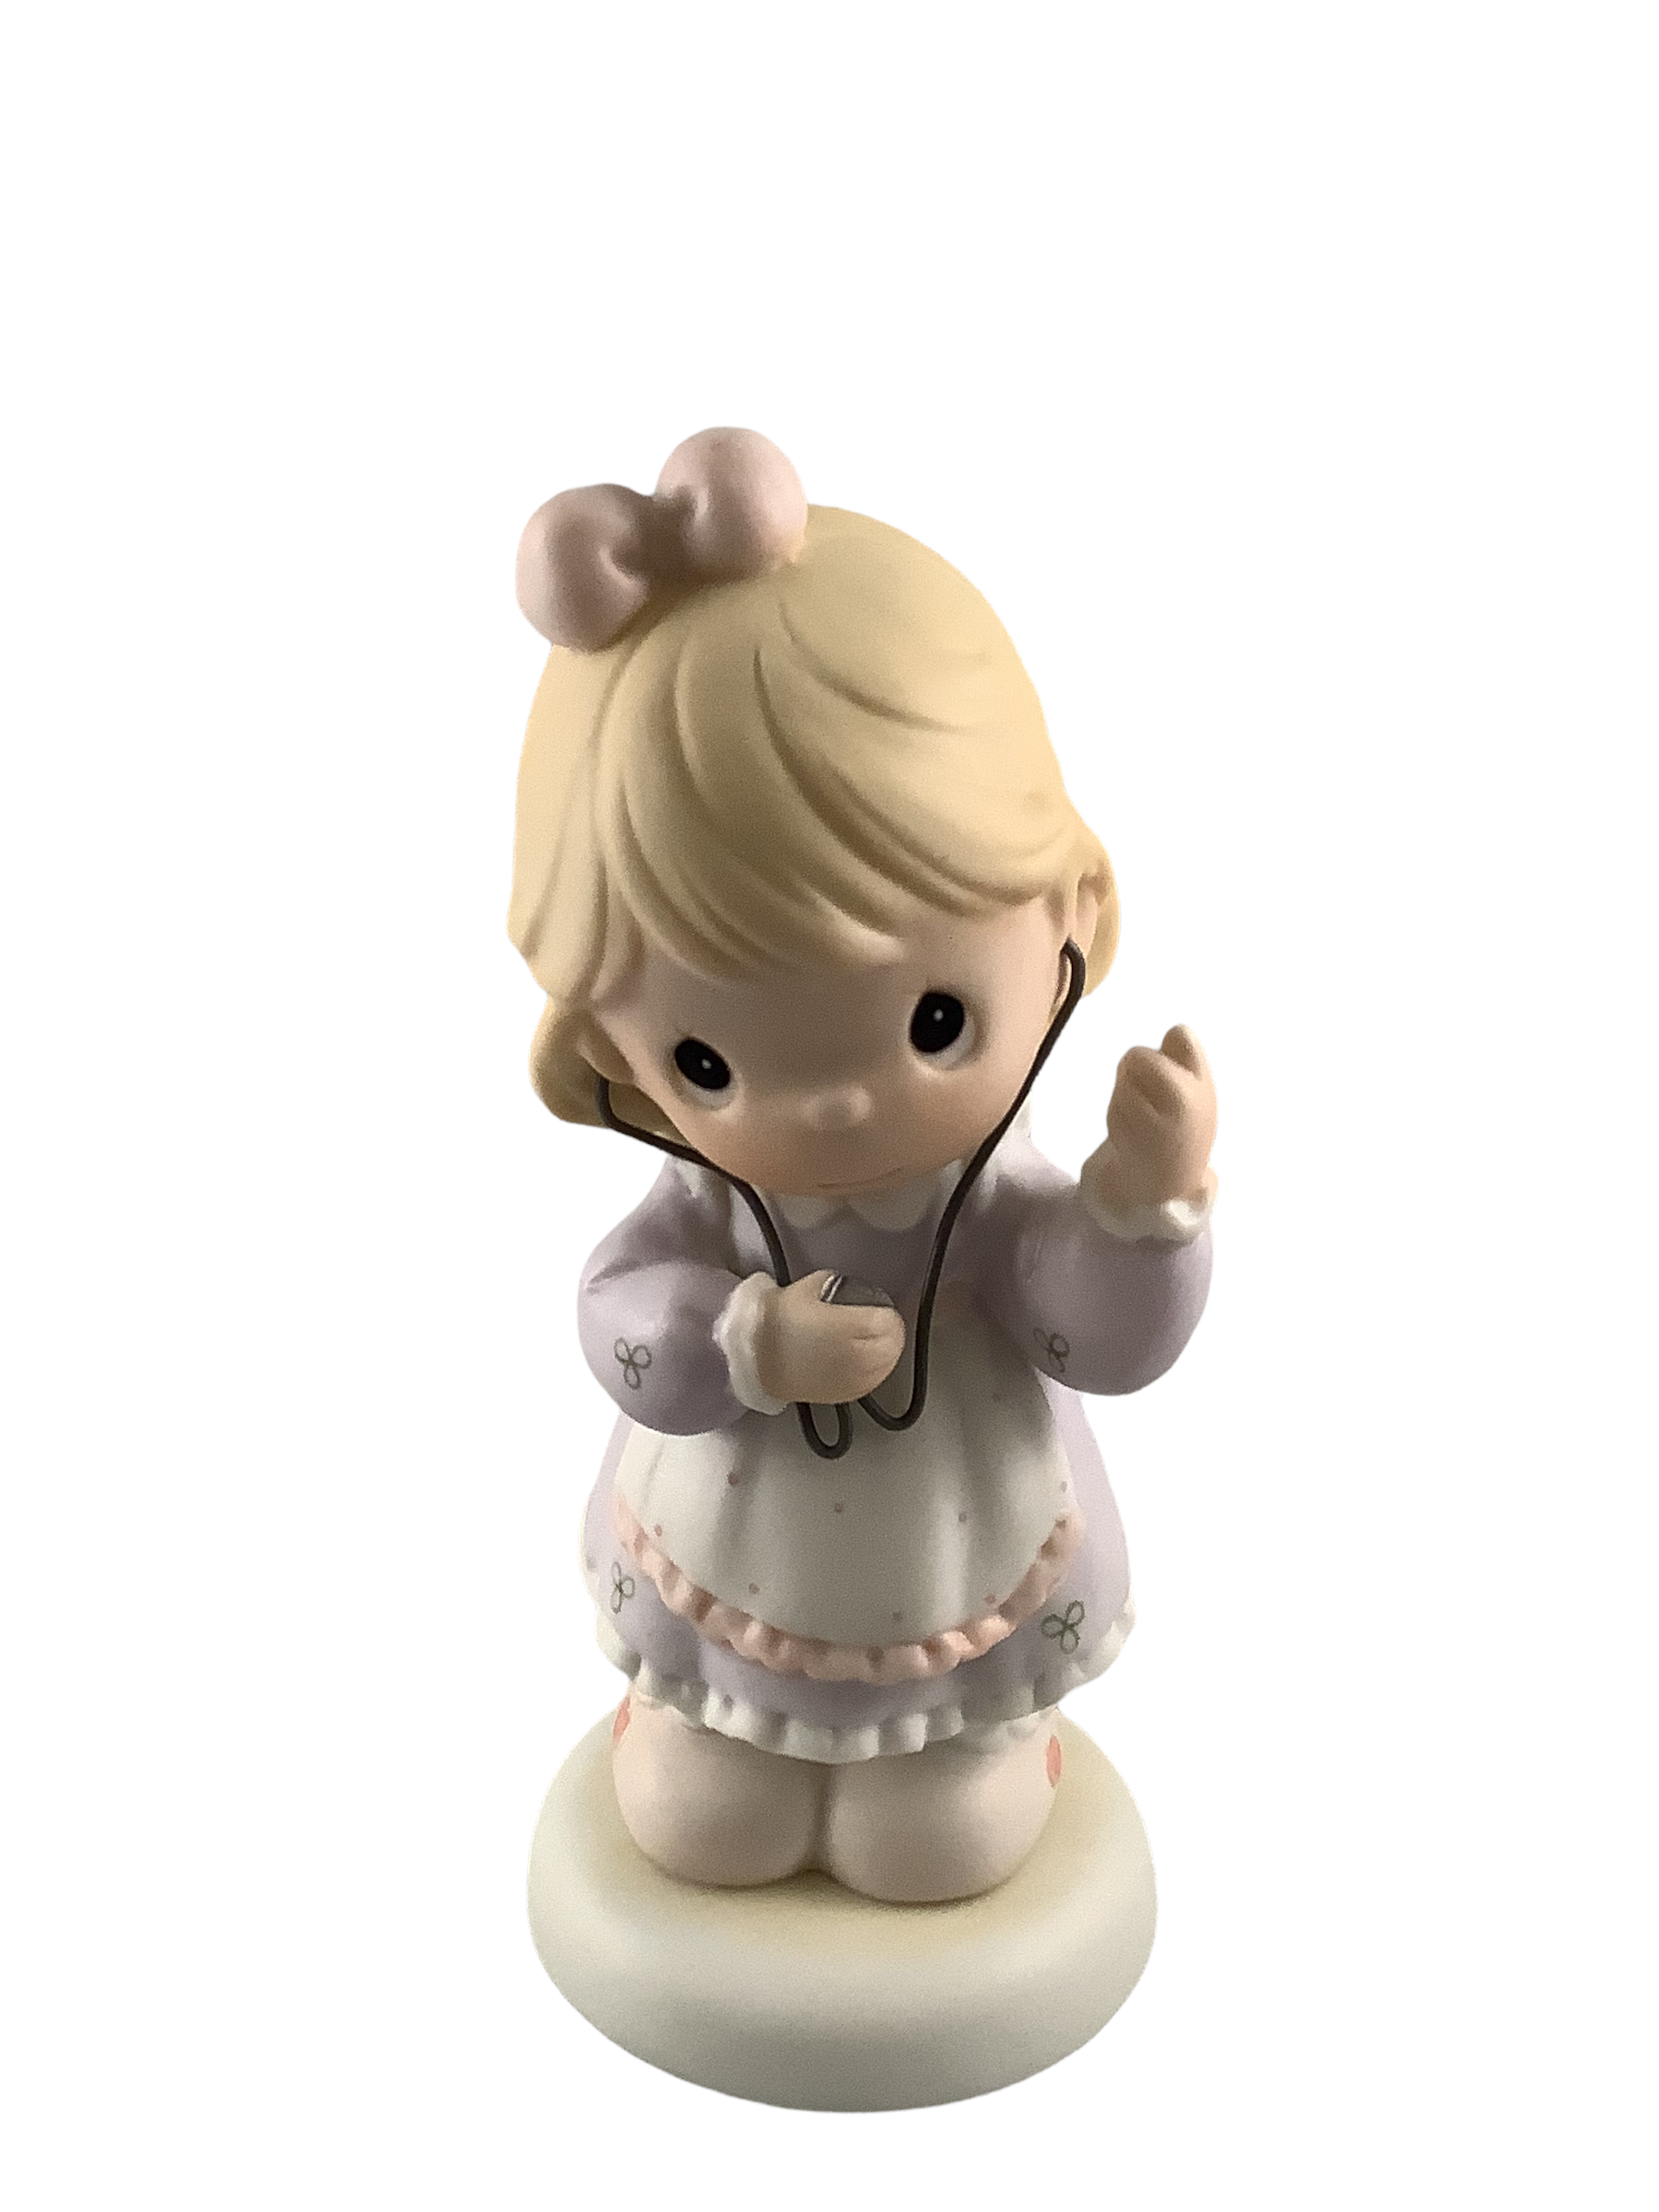 Always Listen To Your Heart - Precious Moment Figurine